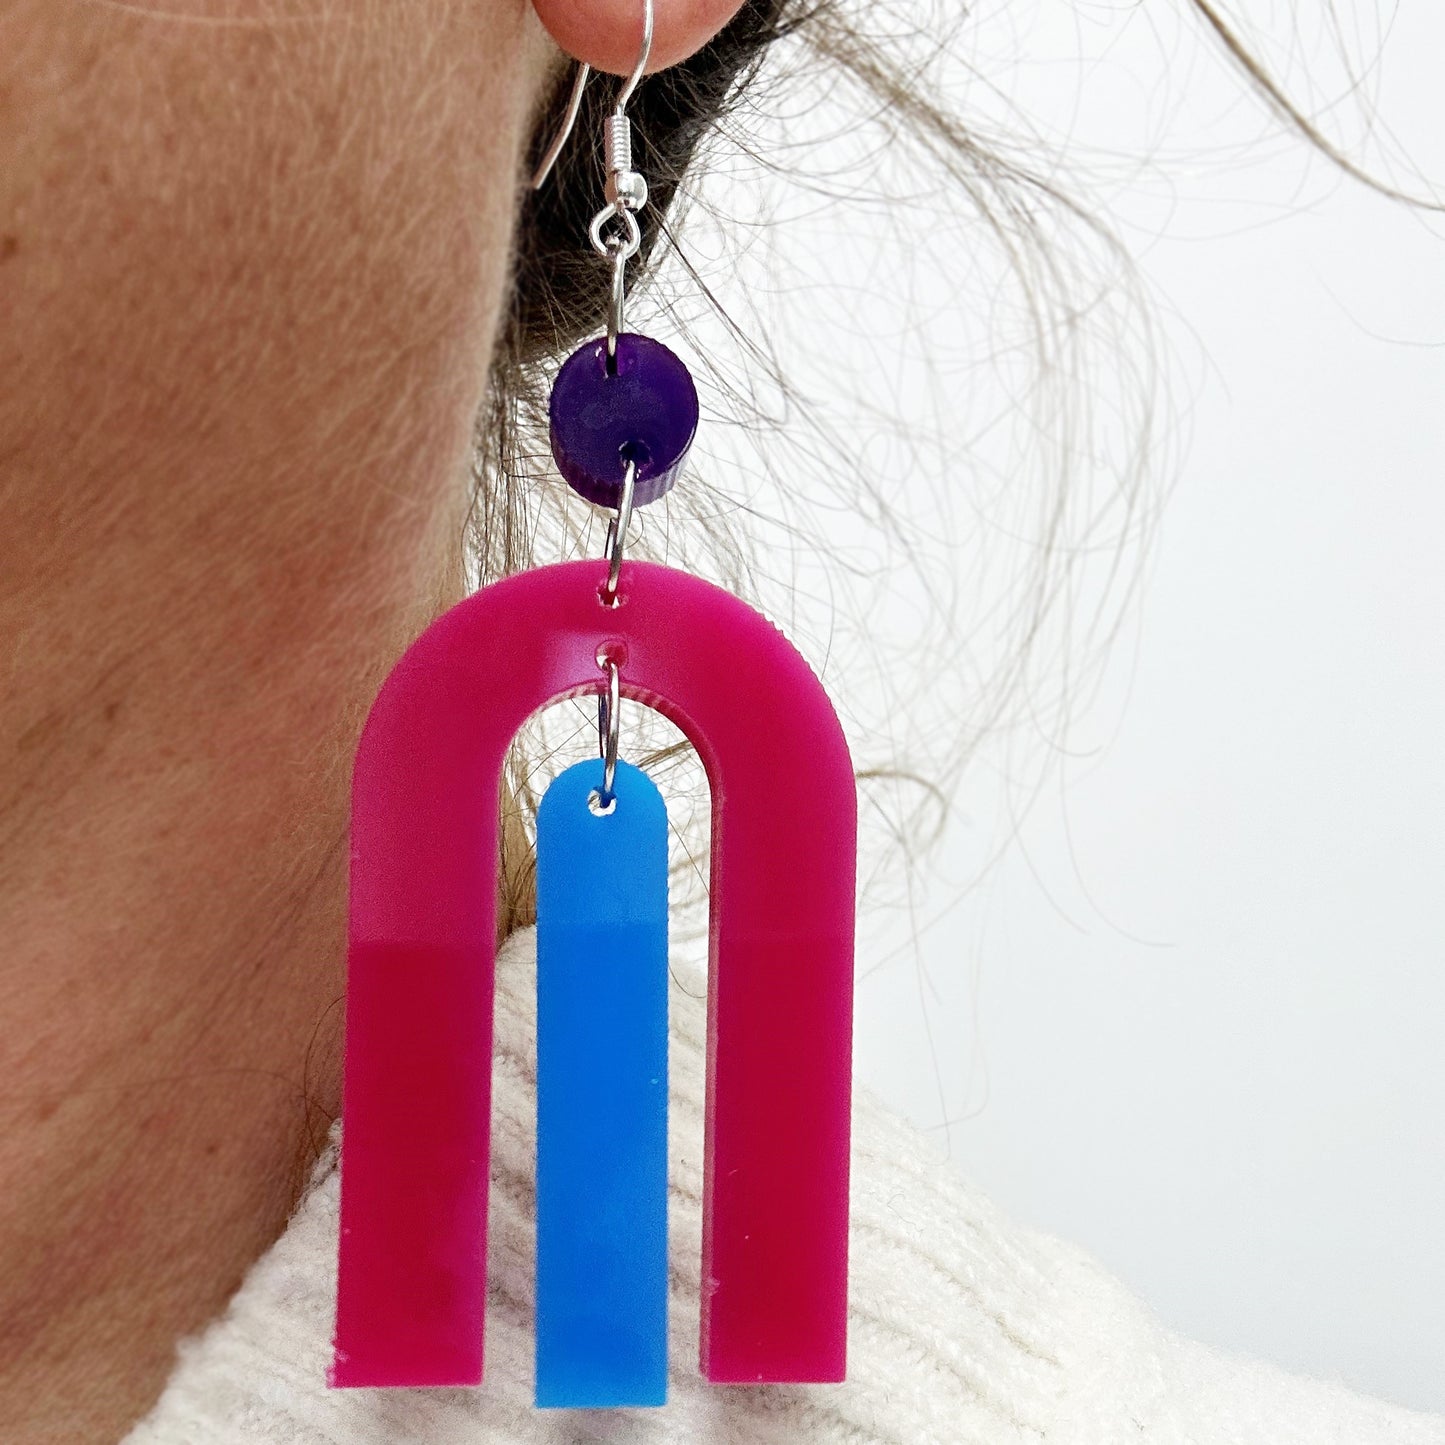 modern bright and colourful geometric arch dangle earrings cut from a purple, pink and turquoise acrylic shown on marble background